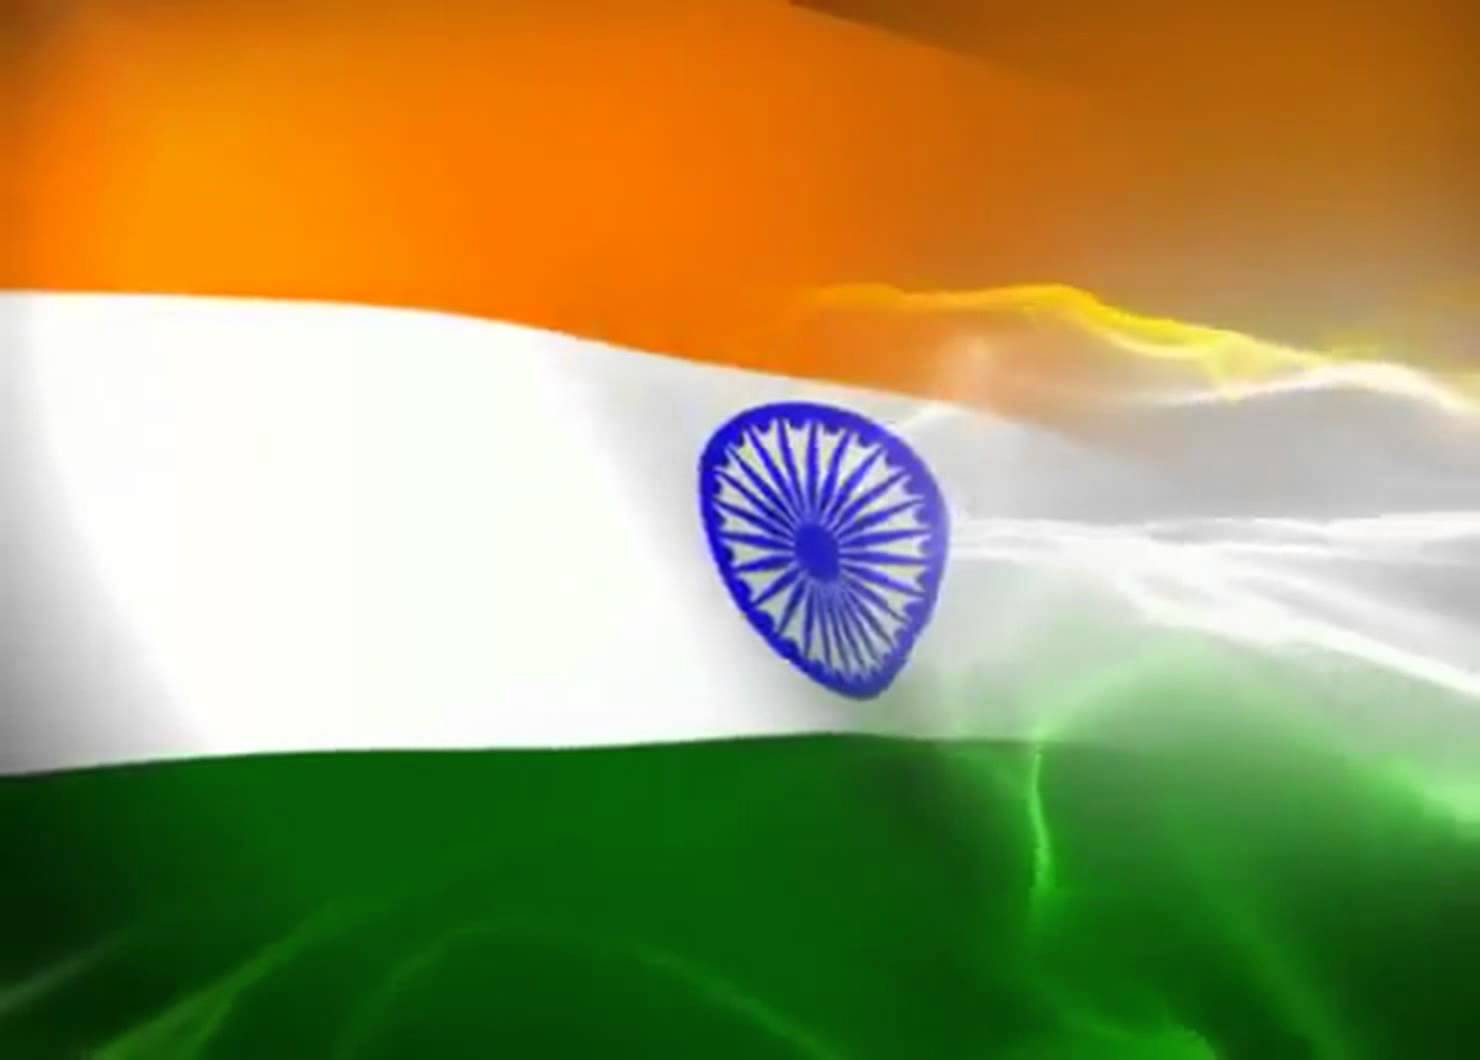 Image Collection of Indian Flags: by Lynetta Murphy – download free